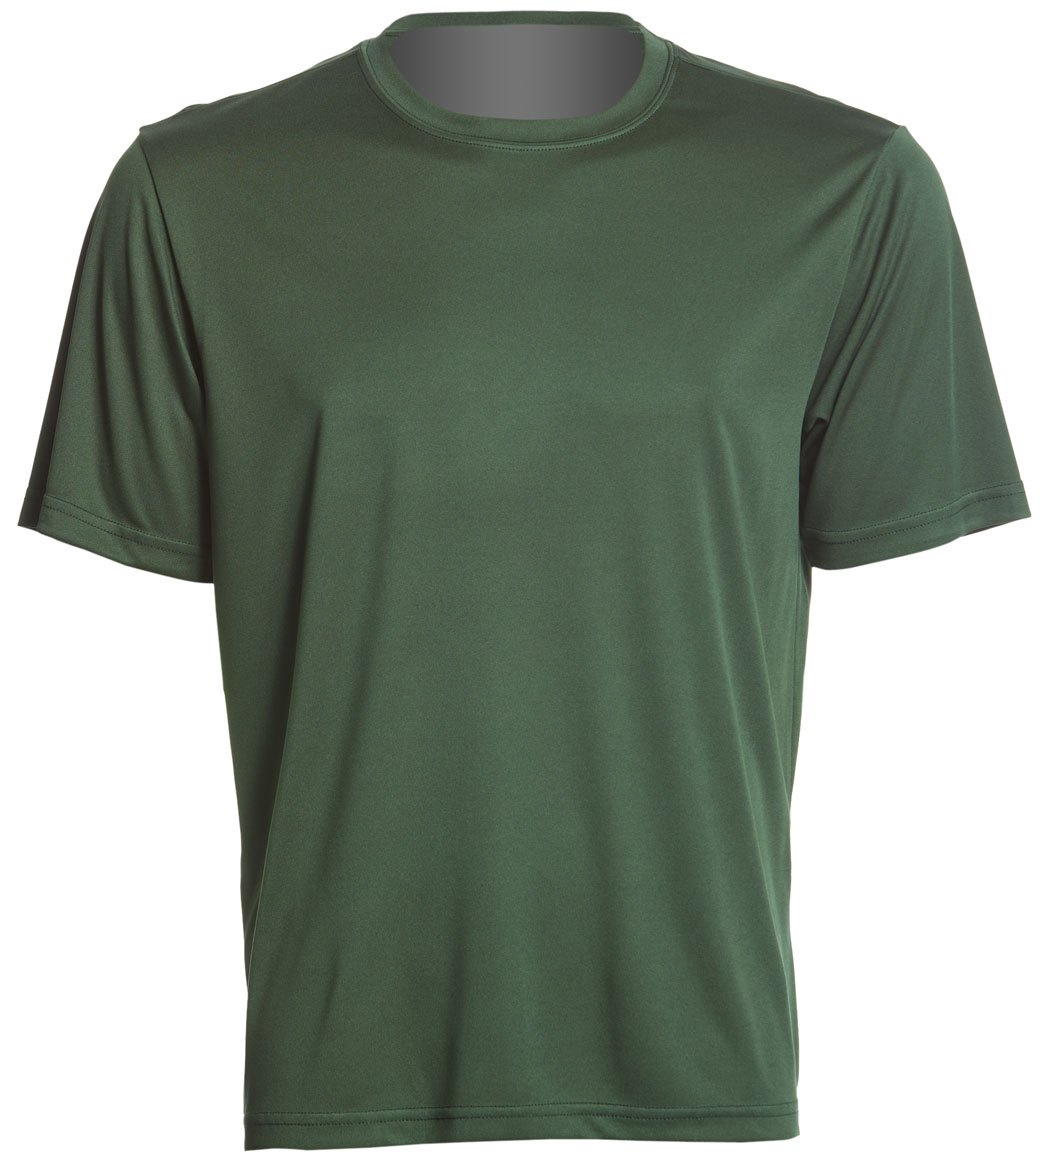 Men's Posicharge Competitortm Tee Shirt - Forest Green Large Polyester - Swimoutlet.com